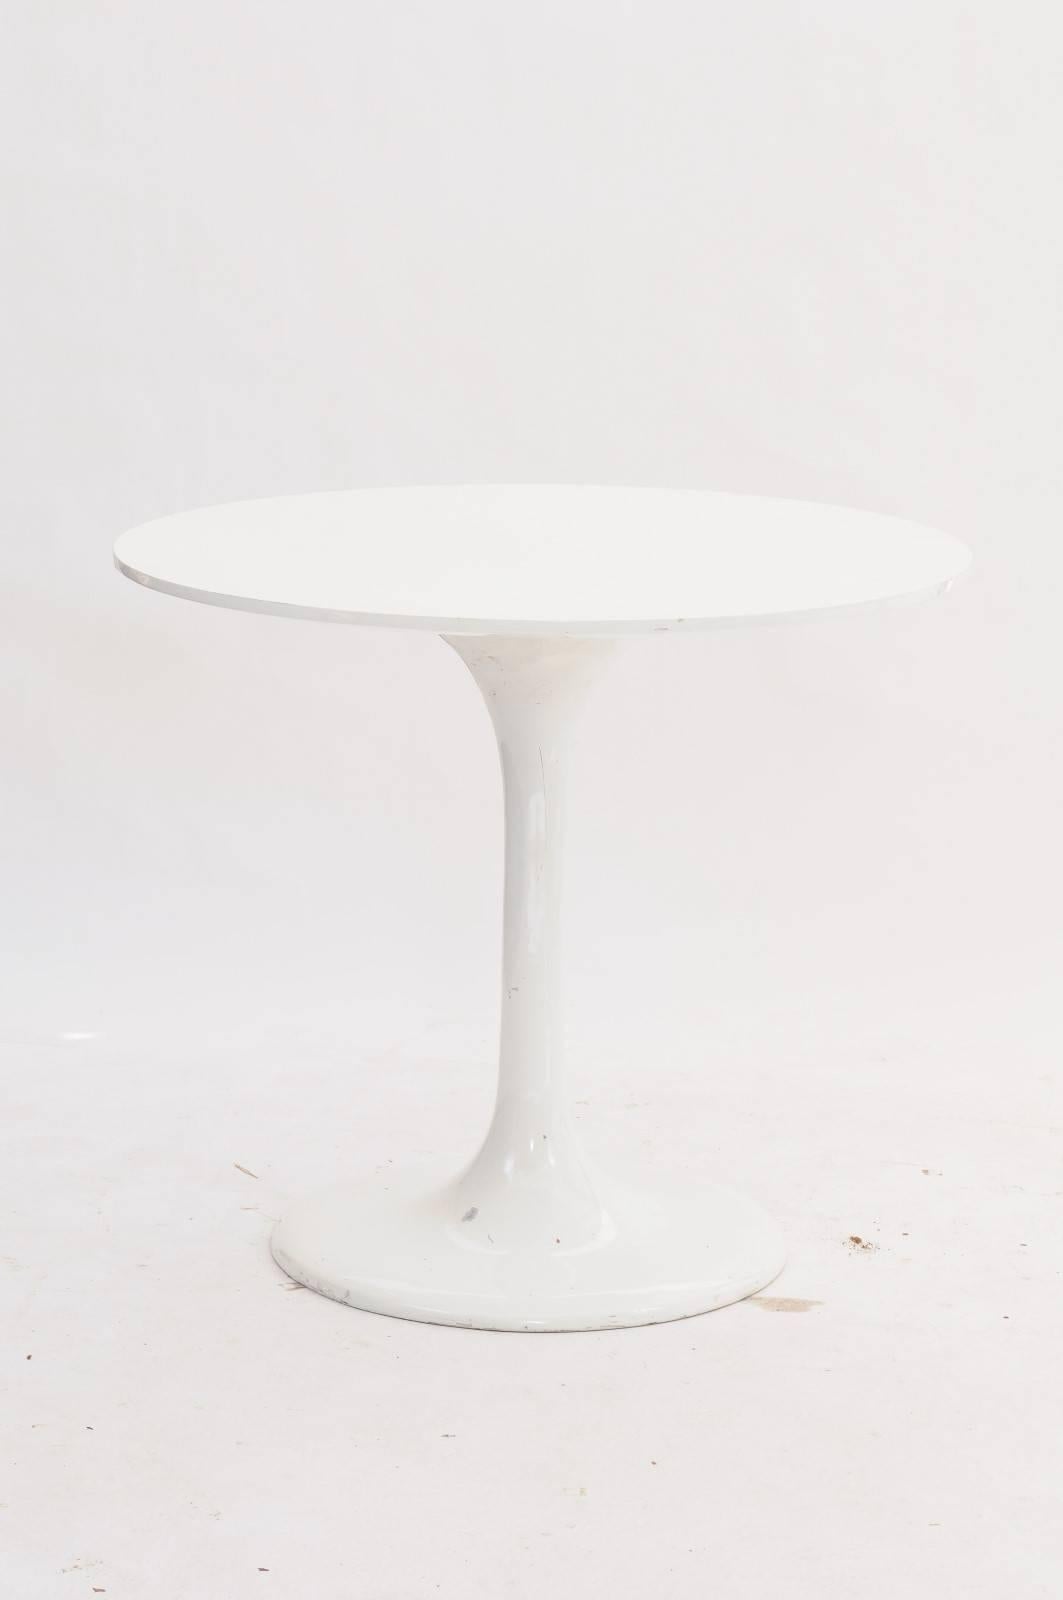 A French Mid-Century Modern white resin tulip round dining or center table from the 1970s. A mélange of vintage beauty and contemporary artistry, this white resin tulip table takes style to a whole new level with its clean lines, sleek body and